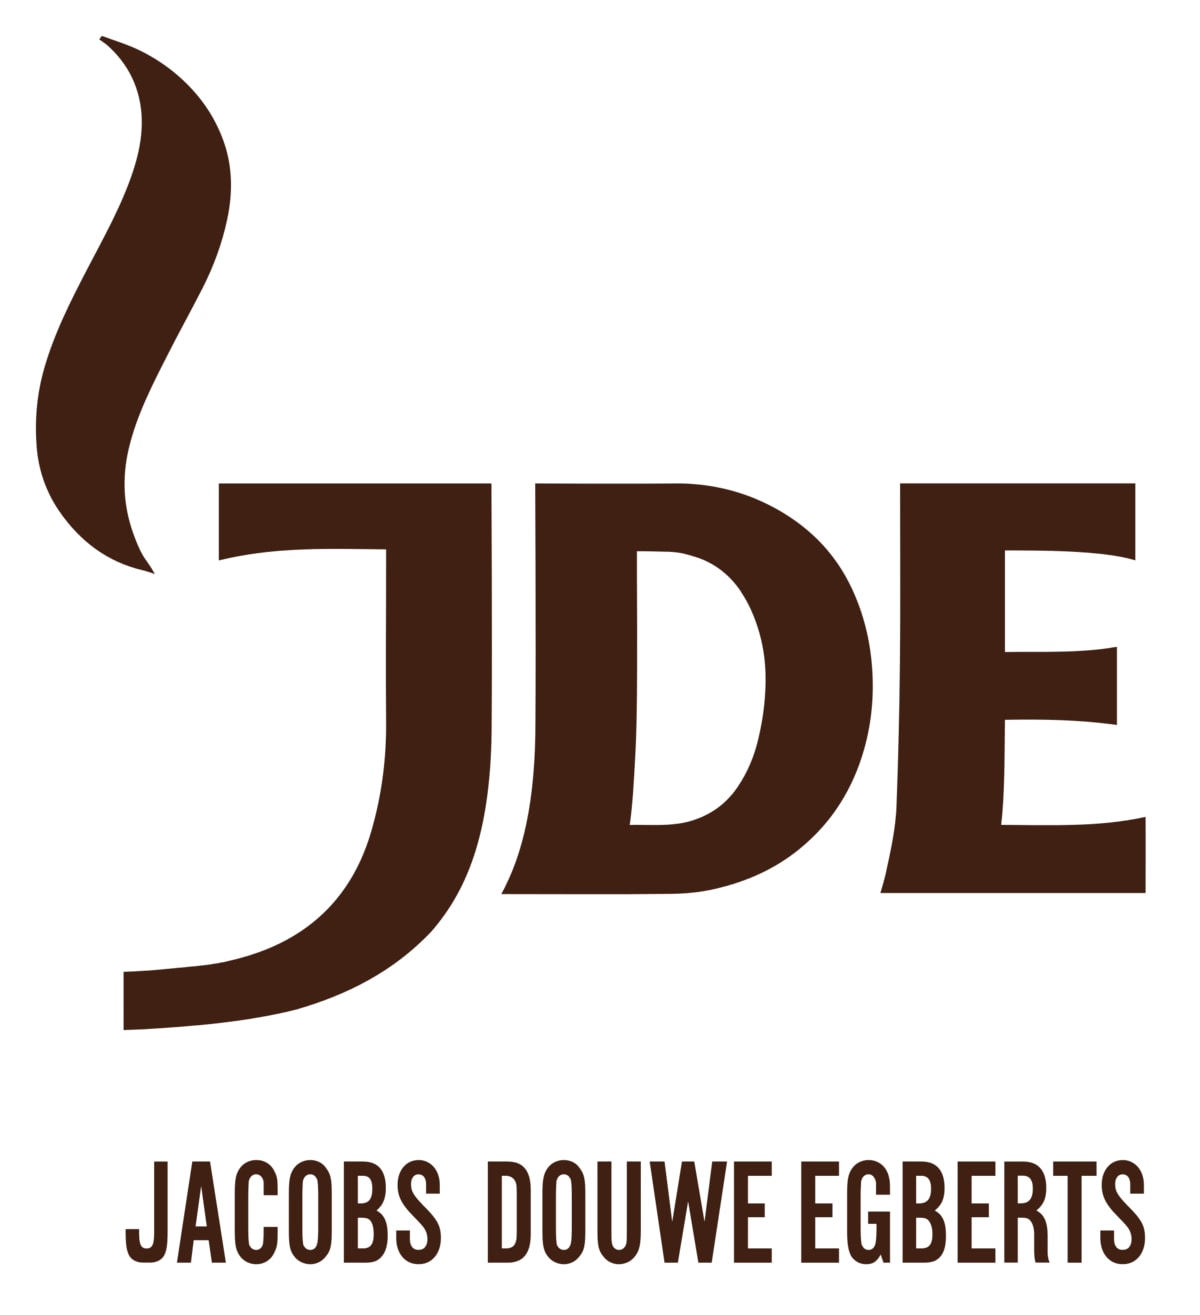 Jacobs - client companiei HR-Consulting